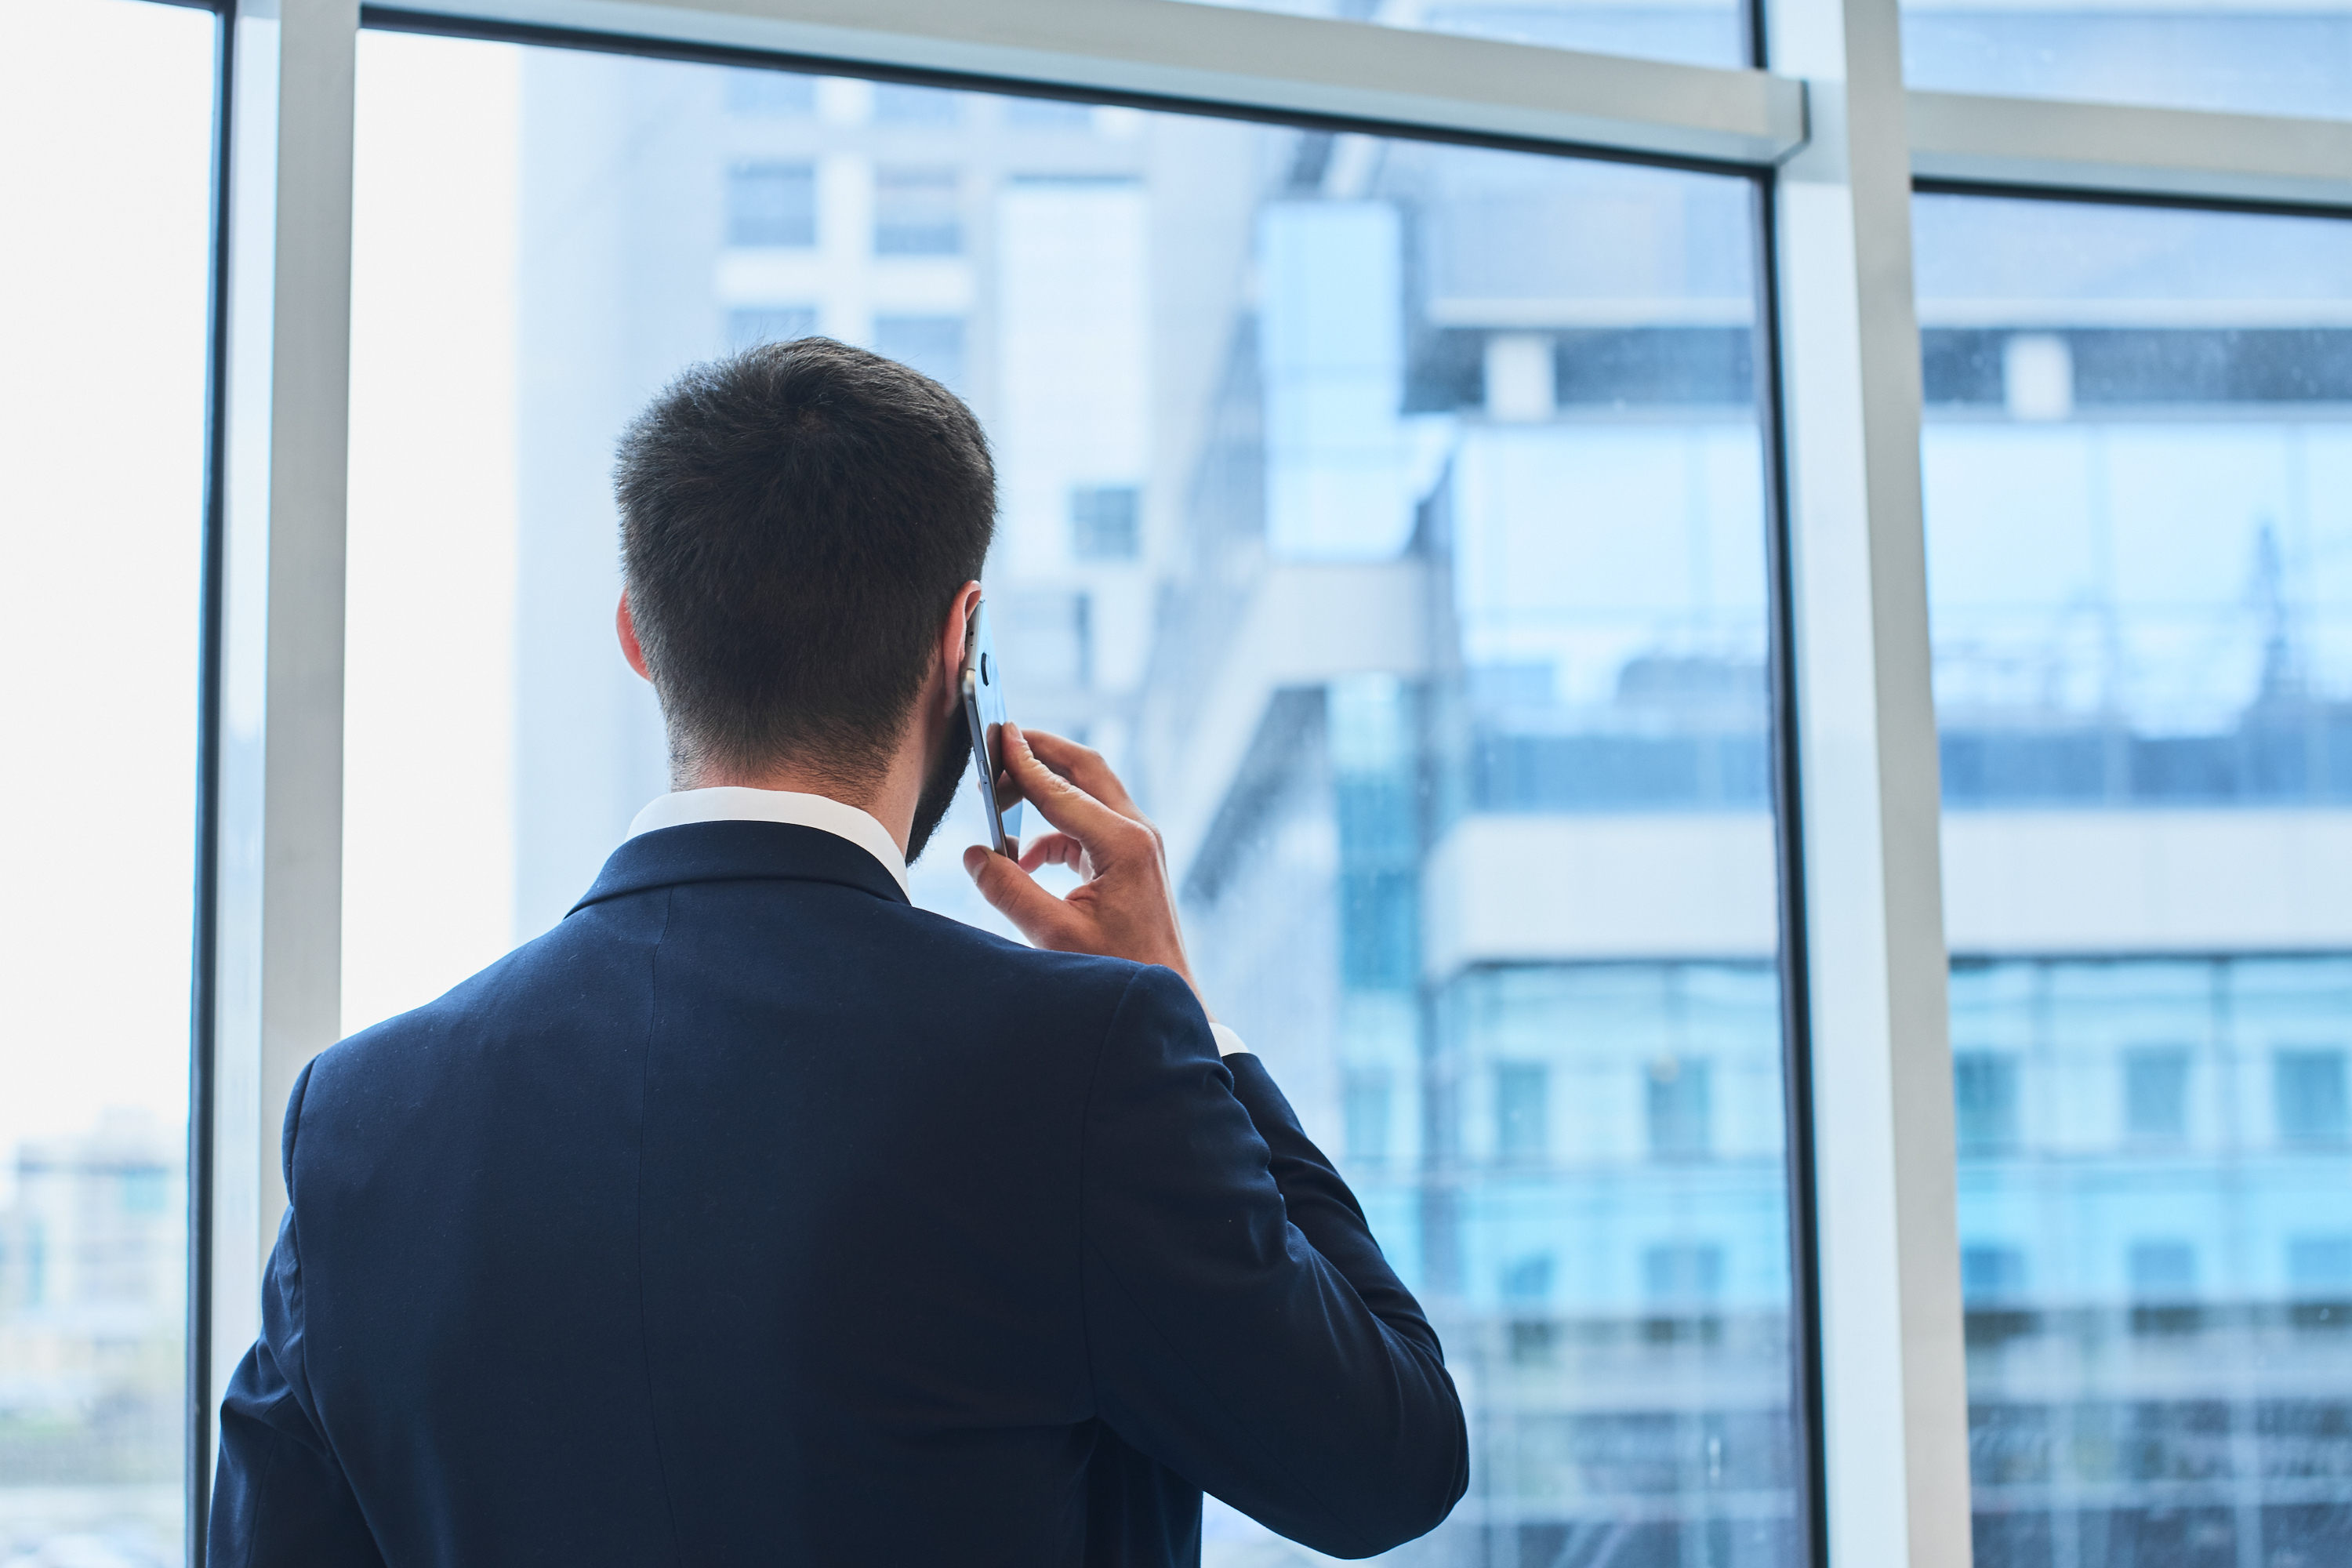 Talking on cell phone and looking out the window. | Source: Shutterstock